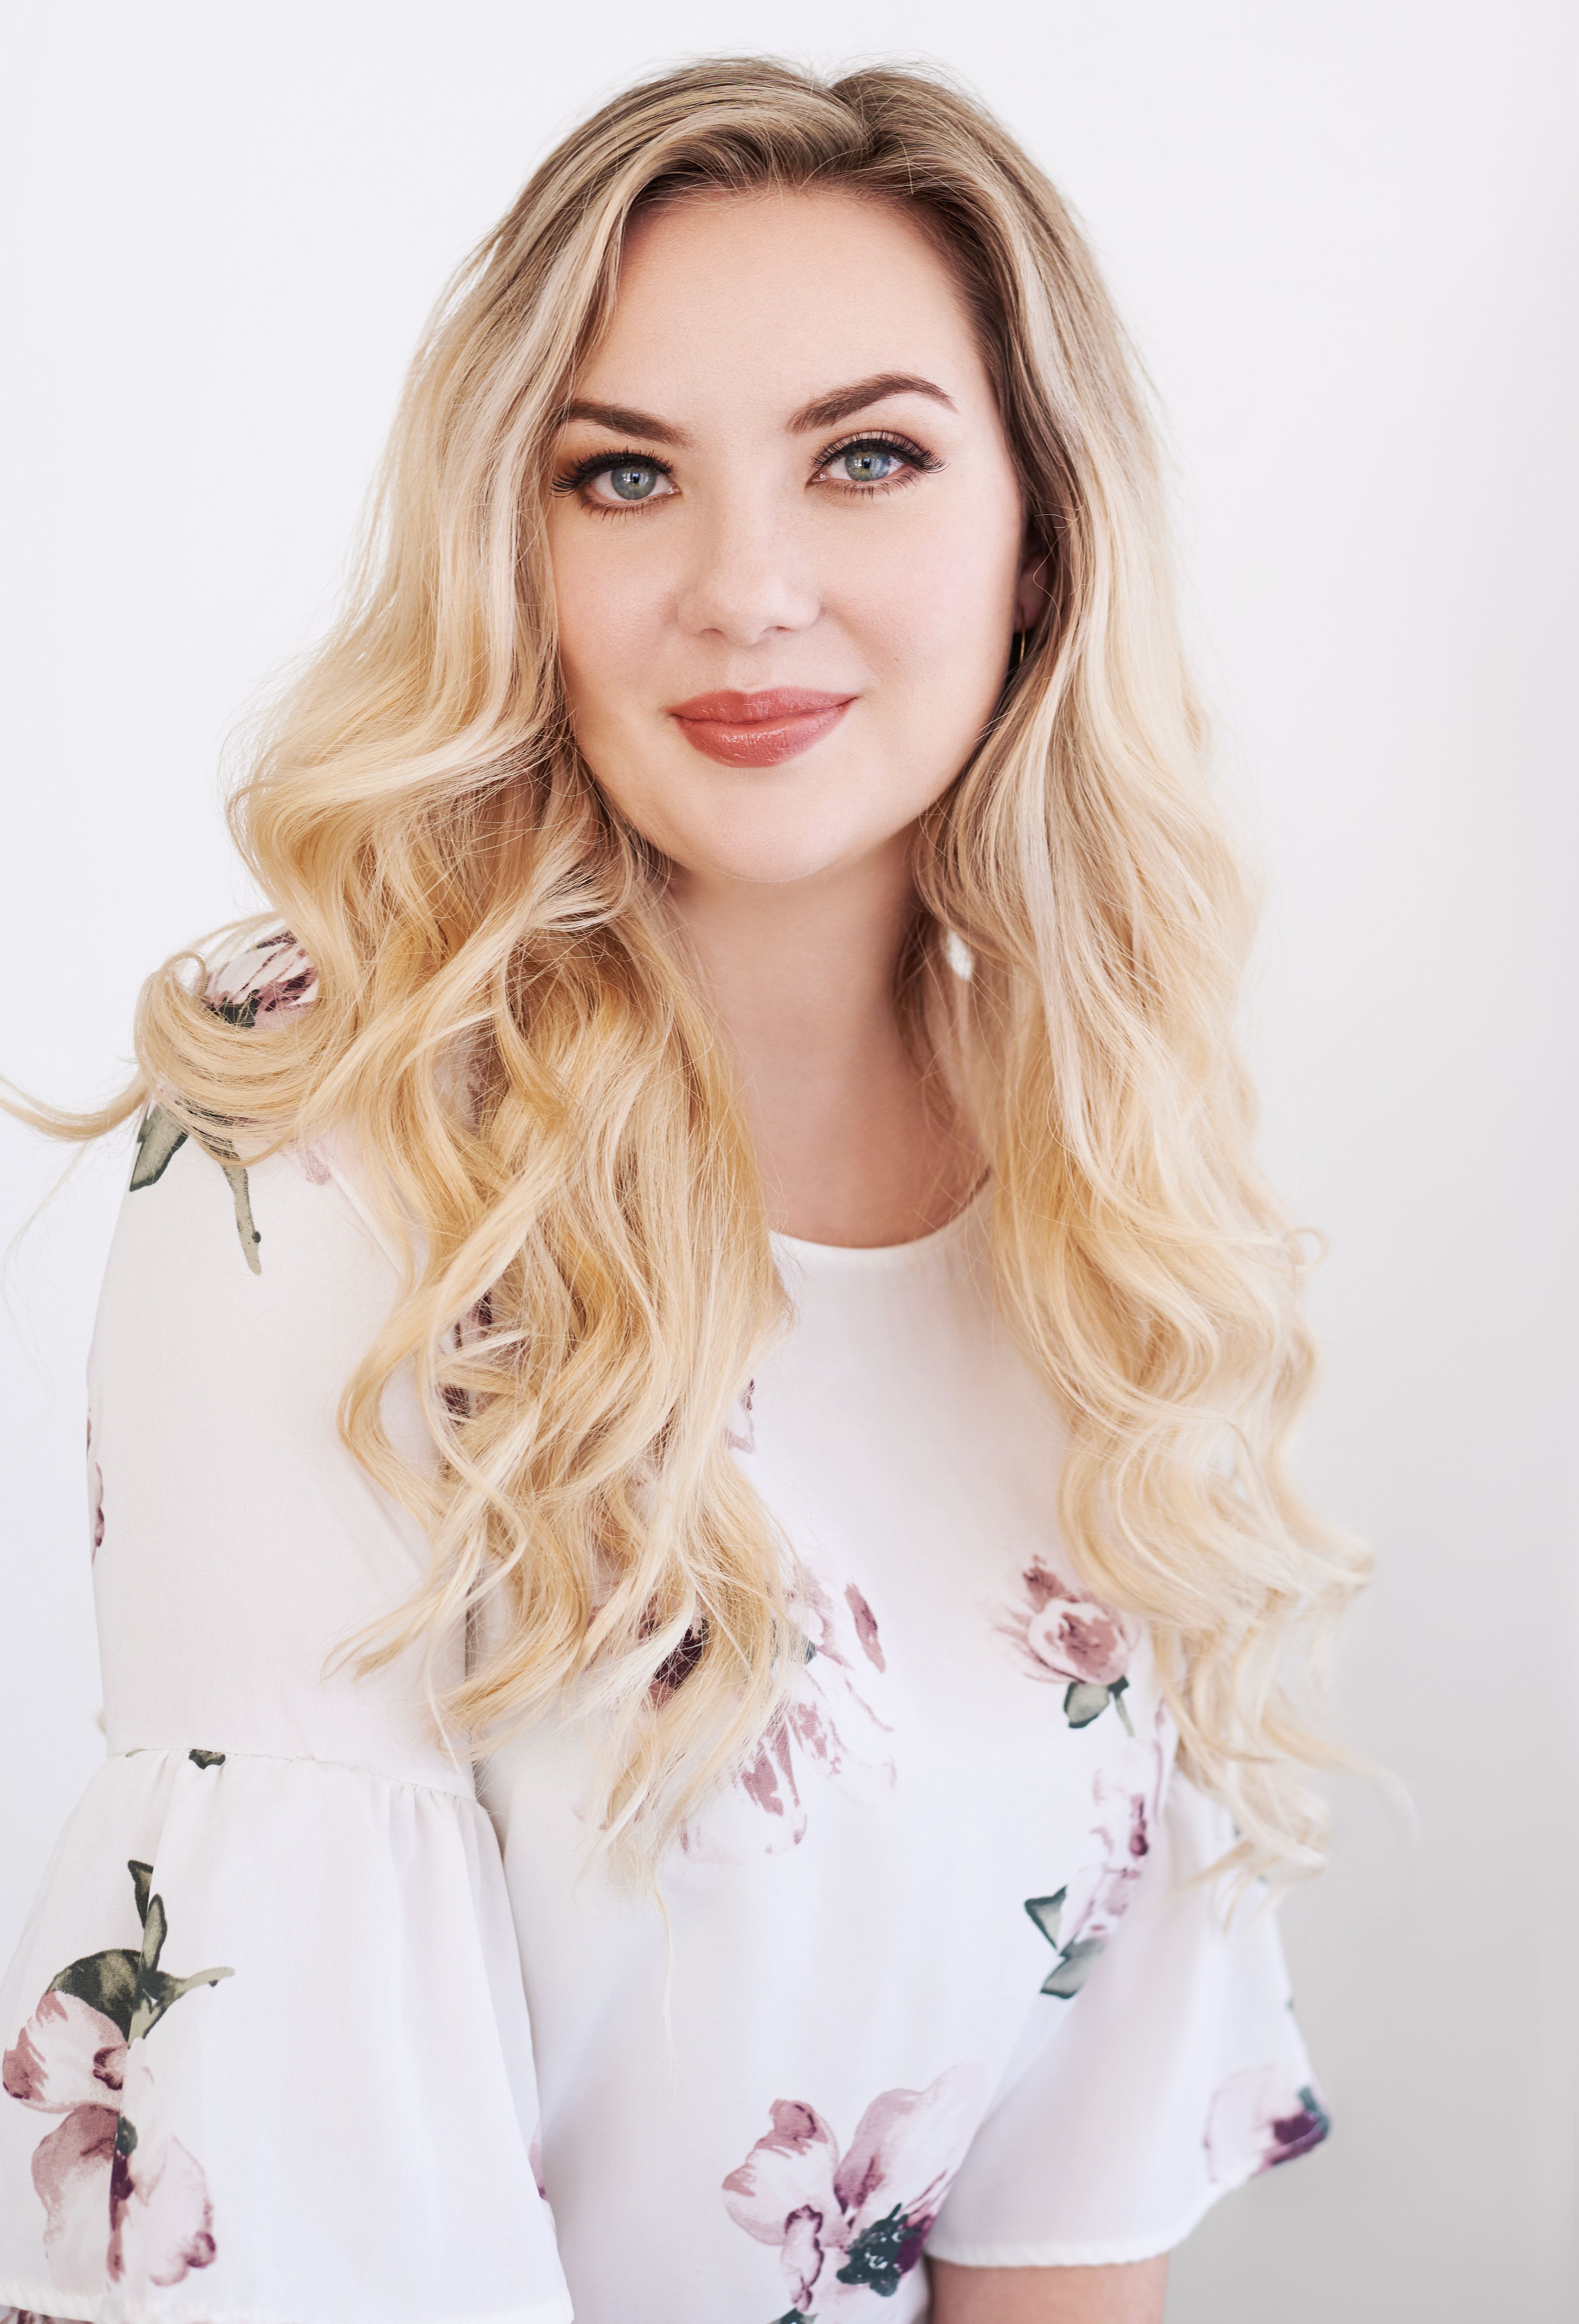 Beautiful smiling white woman with long blonde hair wearing a white blouse. Professional headshot and glamour shot.